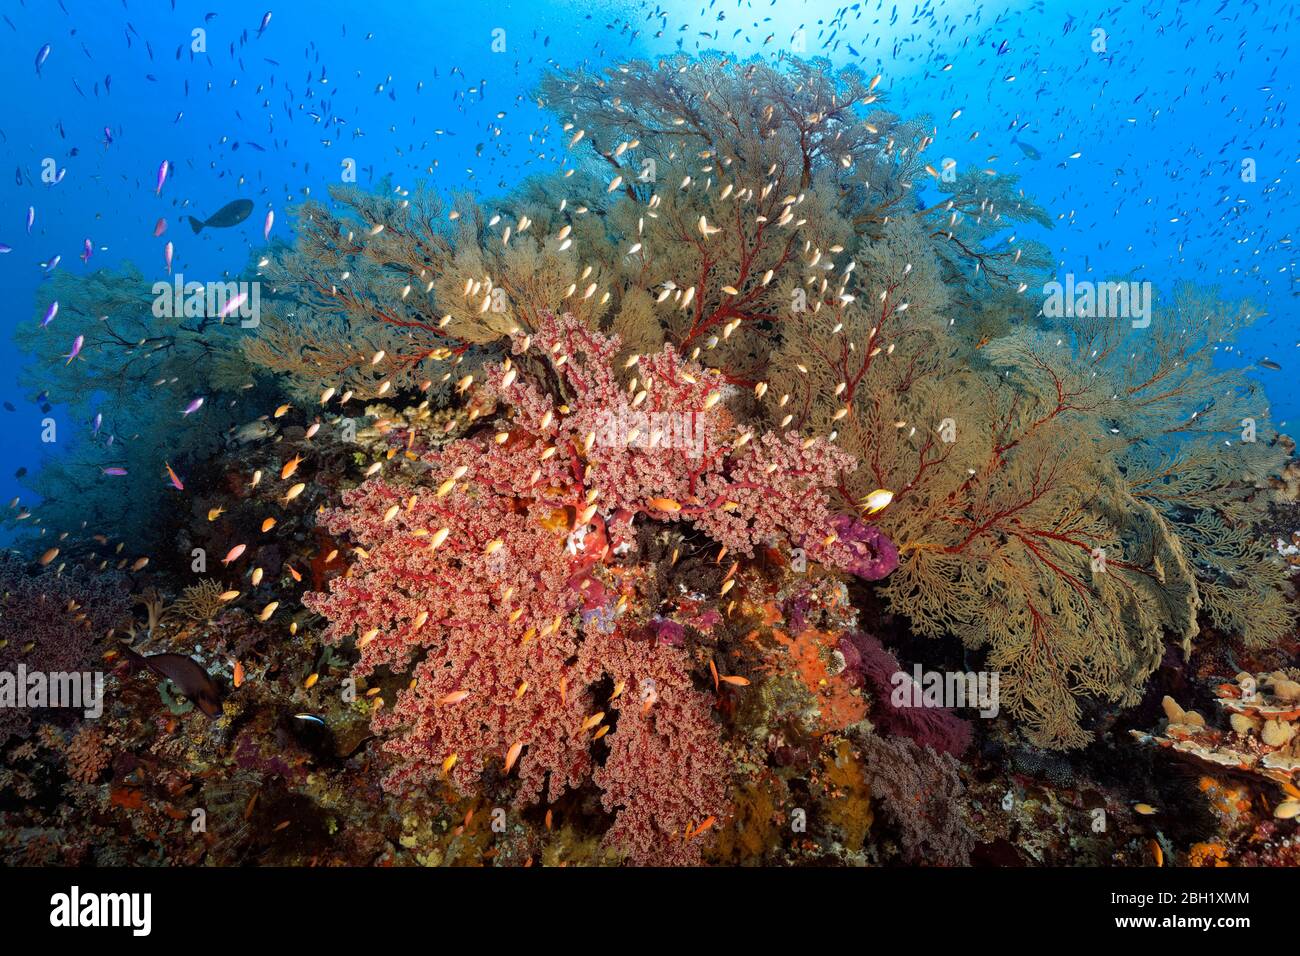 Coral reef with large Melthaea gorgonian (Melithaea sp.), Cherry Blossom Coral (Siphonogorgia godeffroyi), many different Anthias (Anthiinae) Stock Photo